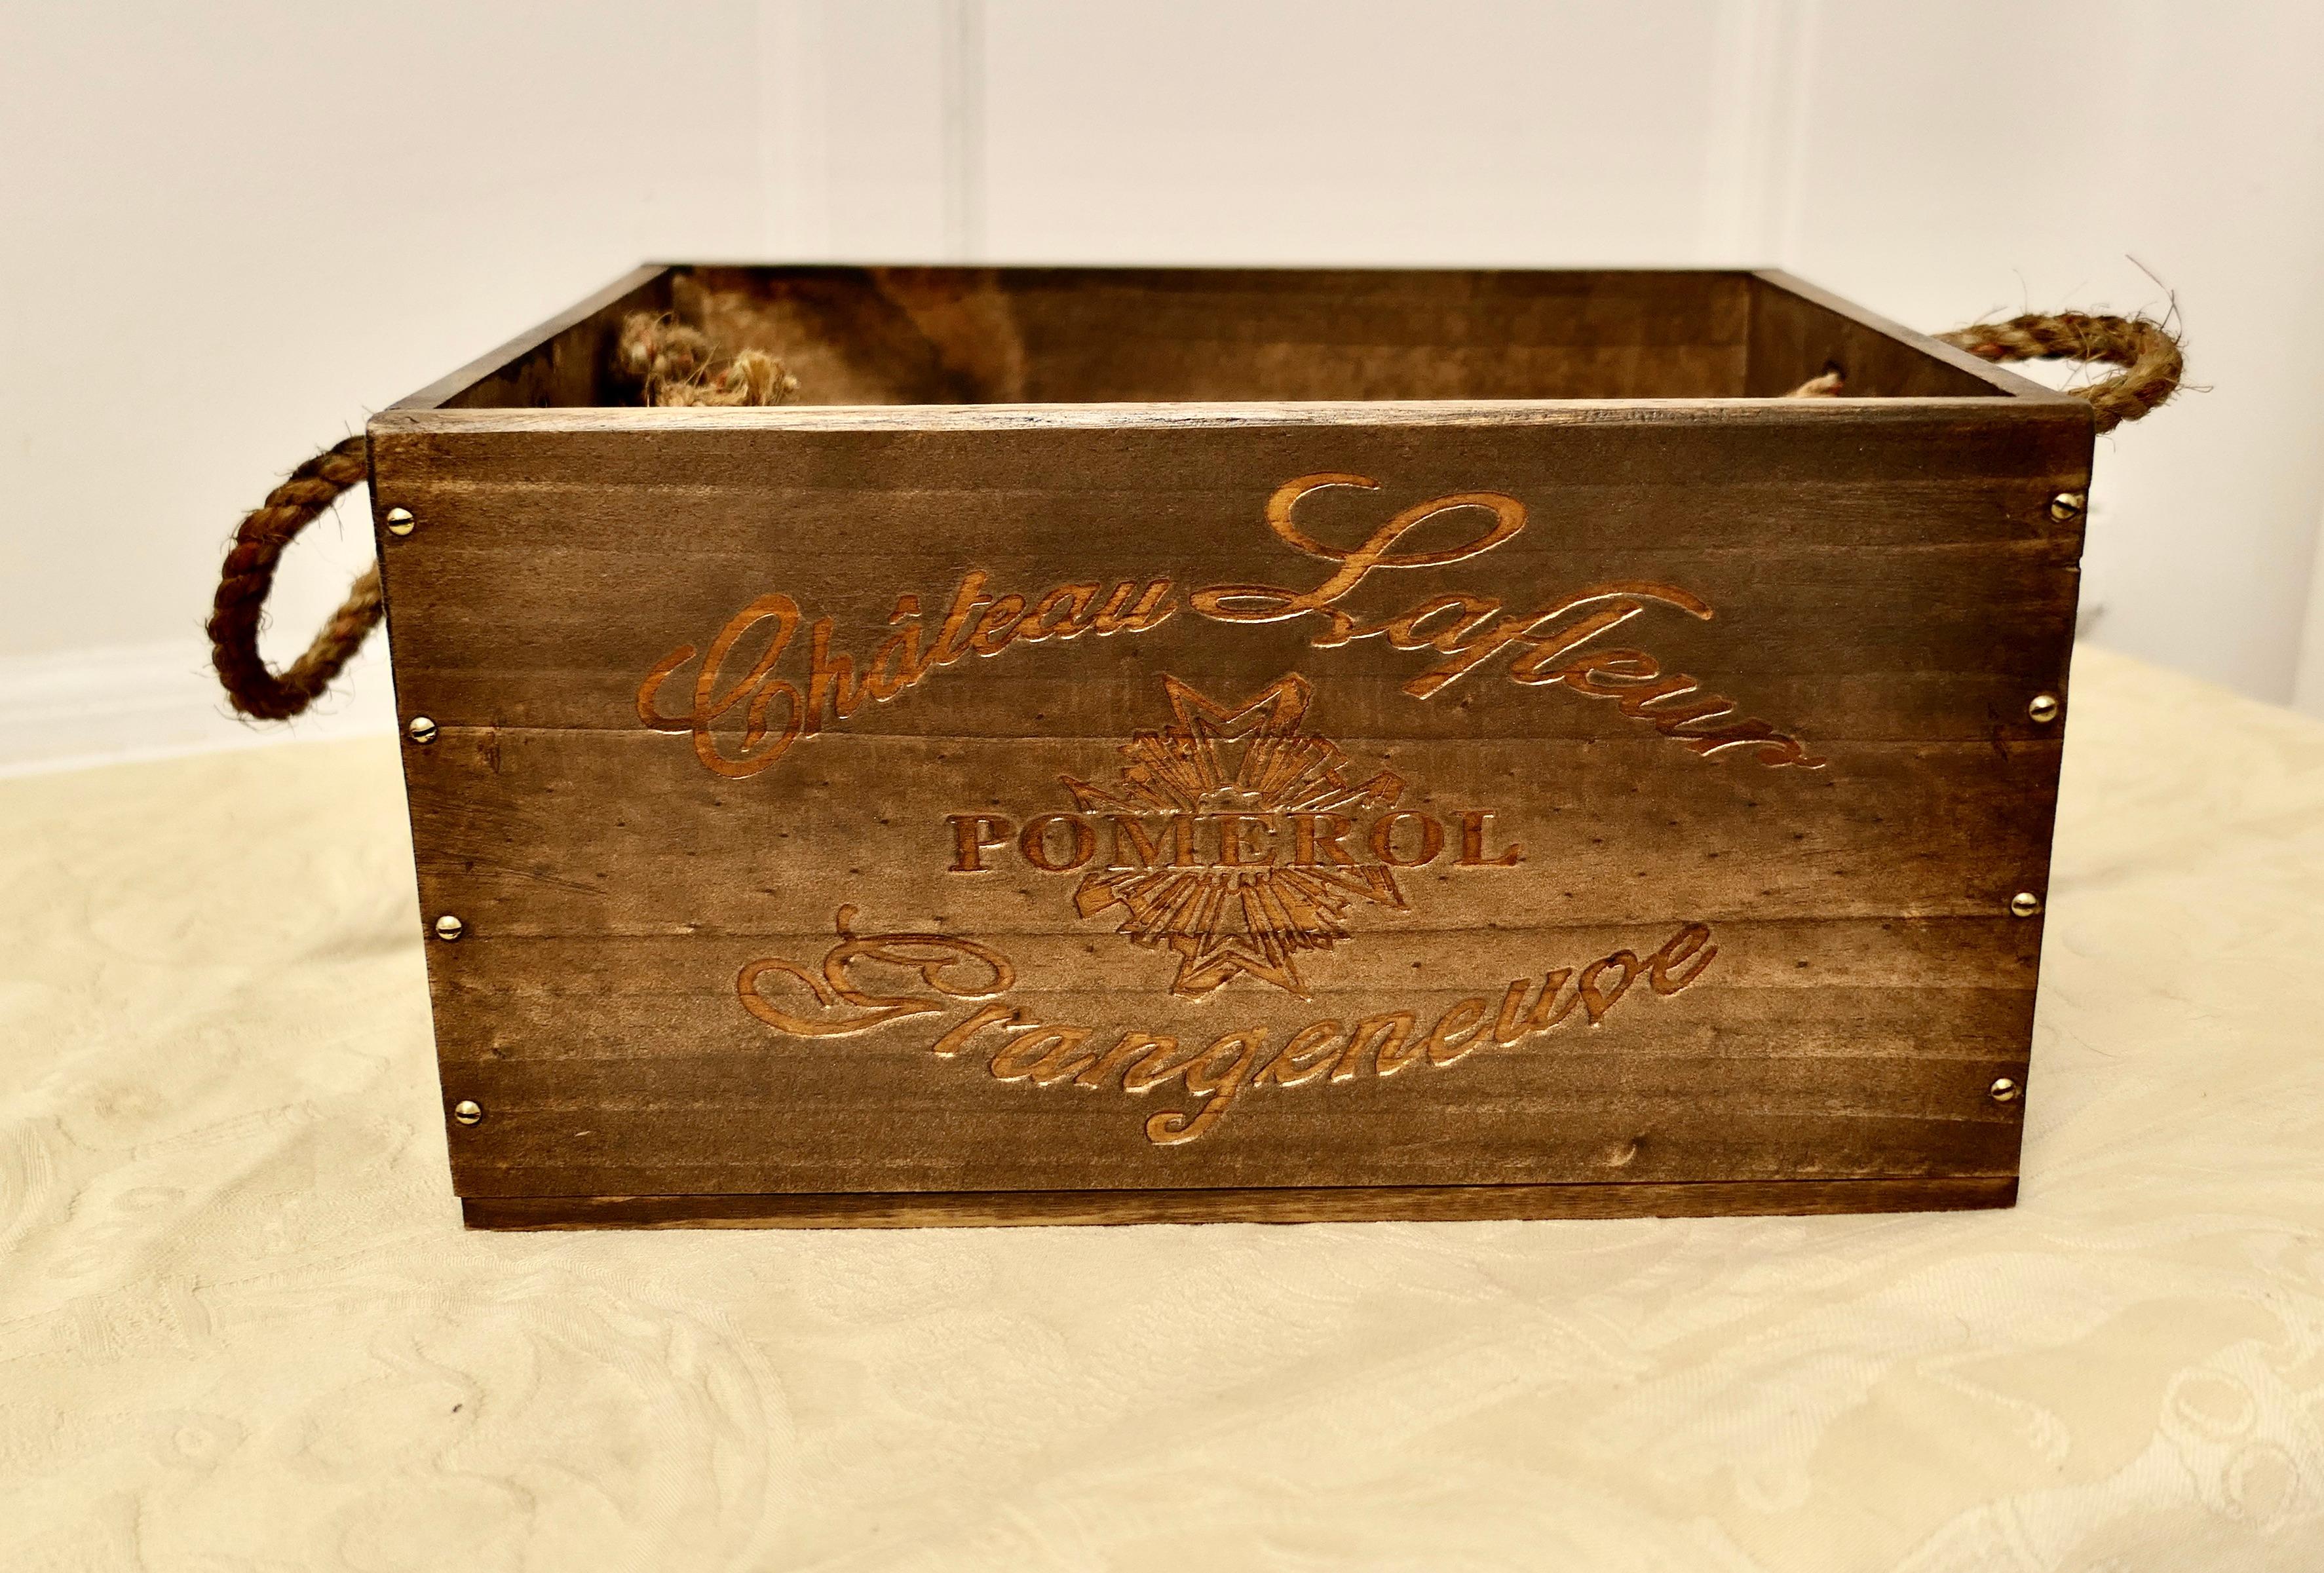  Bespoke Wine Box Gift Box, Tidy, Hamper, Container

This attractive piece can be put to many uses, with Christmas and Thanks Giving just around the corner, it would make a great hamper or simple Gift box to set off that special Surprise

Once the